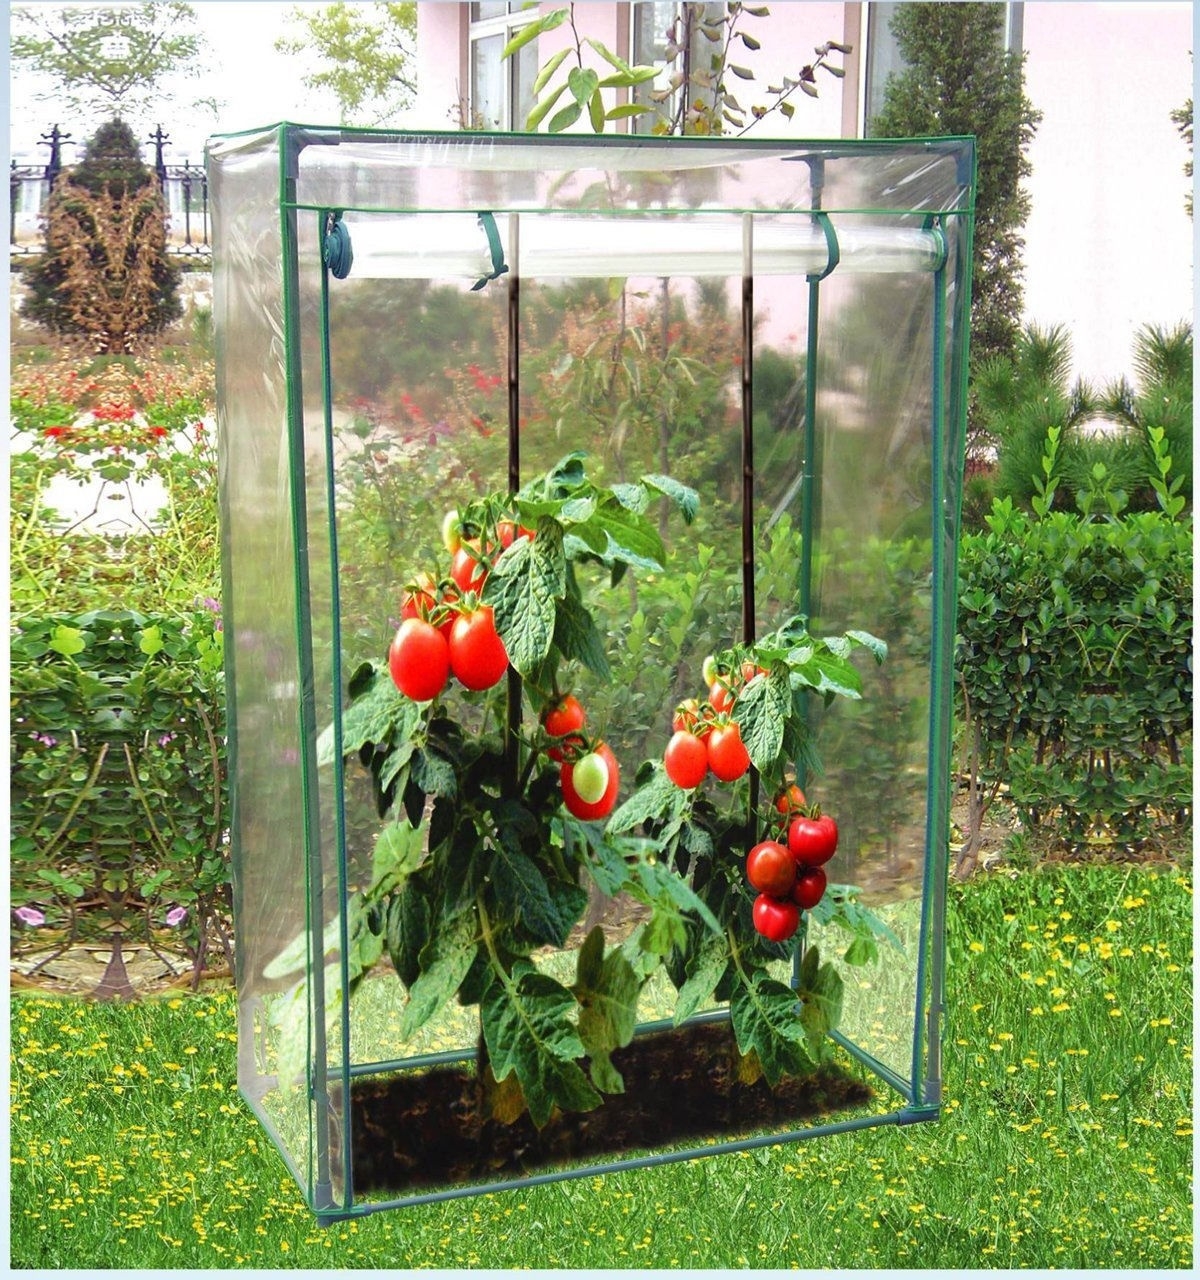 Simple Growing Tomatoes In Grow Bags Outside Photo inside Mini Greenhouse Growbag Tomato Growhouse Pvc Covers Plastic Garden